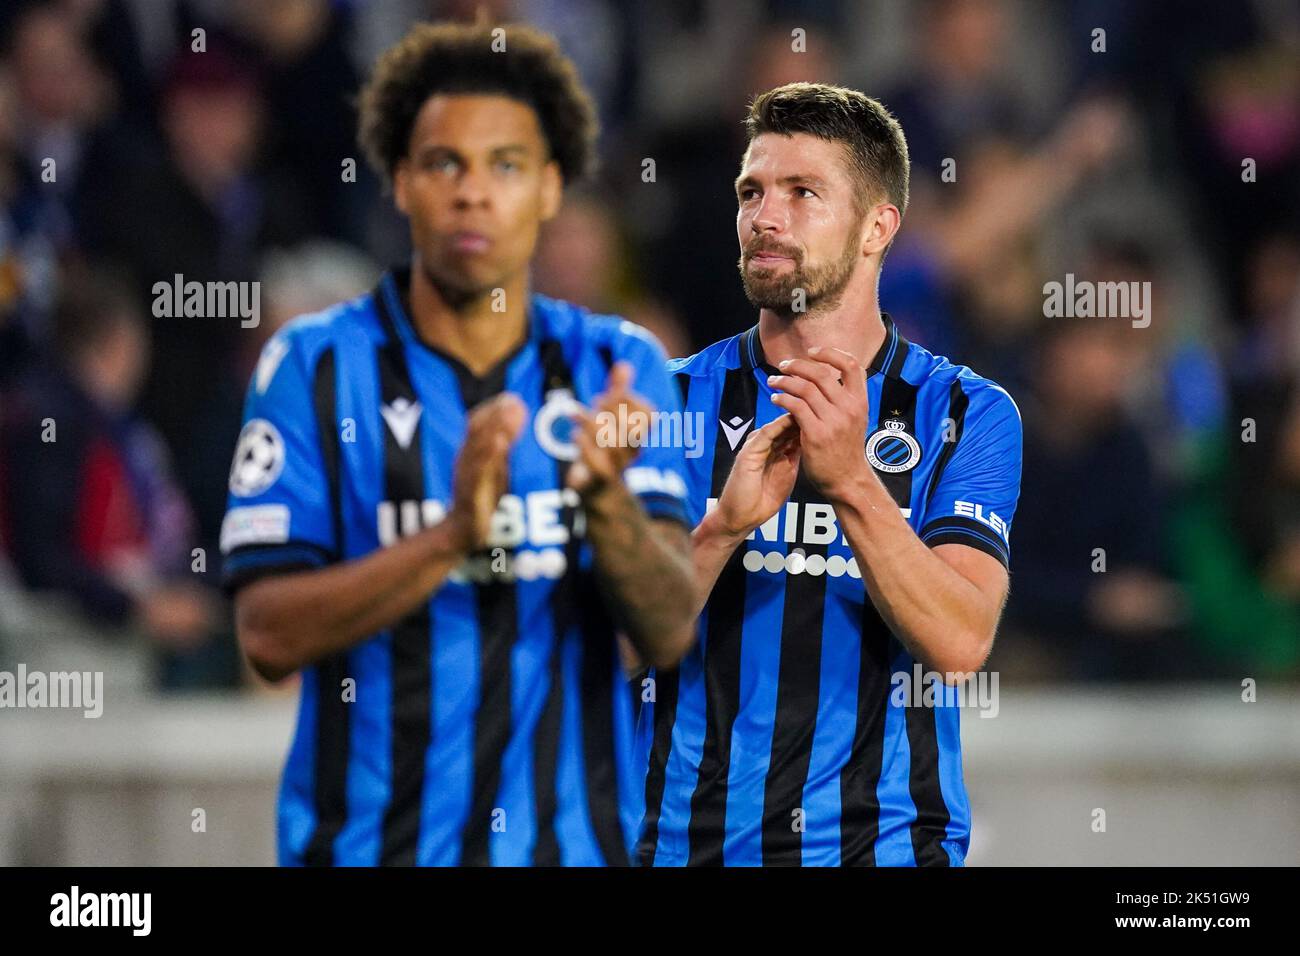 BRUGGES, BELGIUM - OCTOBER 4: Brandon Mechele of Club Brugge KV applauds for the fans after the Group B - UEFA Champions League match between Club Brugge KV and Atletico Madrid at the Jan Breydelstadion on October 4, 2022 in Brugges, Belgium (Photo by Joris Verwijst/Orange Pictures) Stock Photo